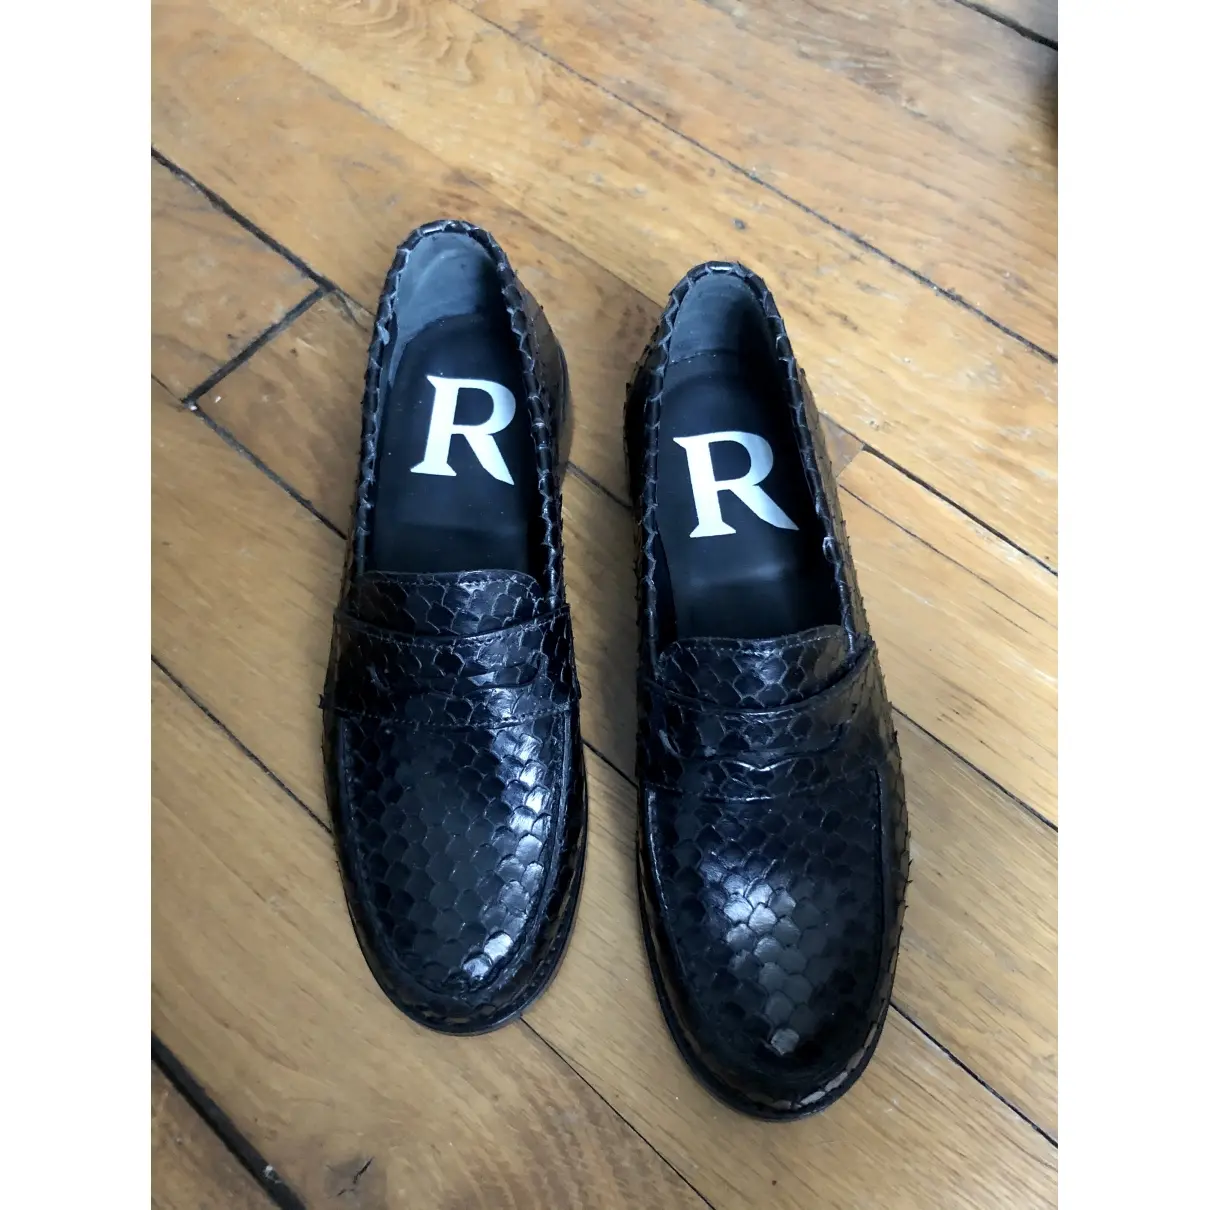 Buy Roseanna Leather flats online